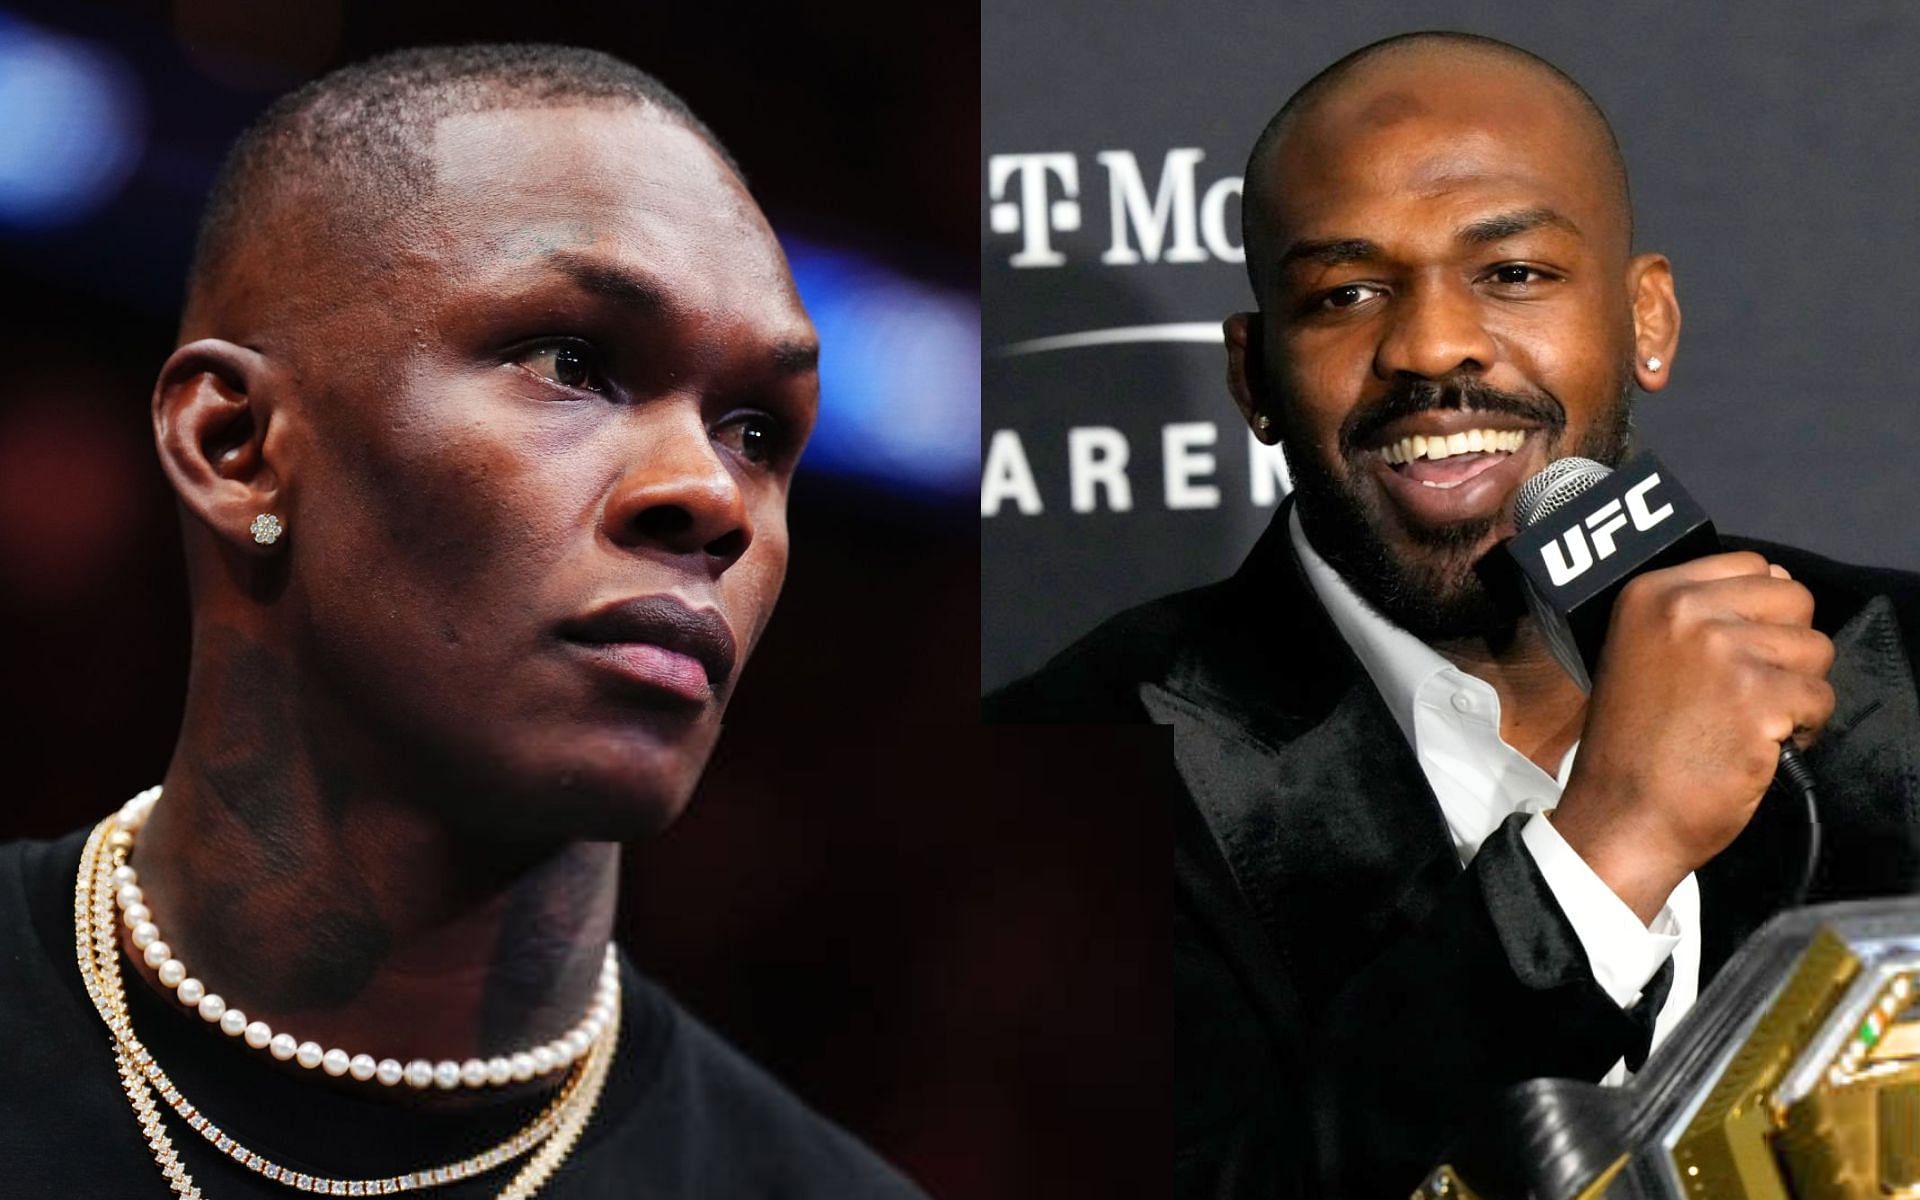 Israel Adesanya (left) and Jon Jones (right) [Images Courtesy: @GettyImages]